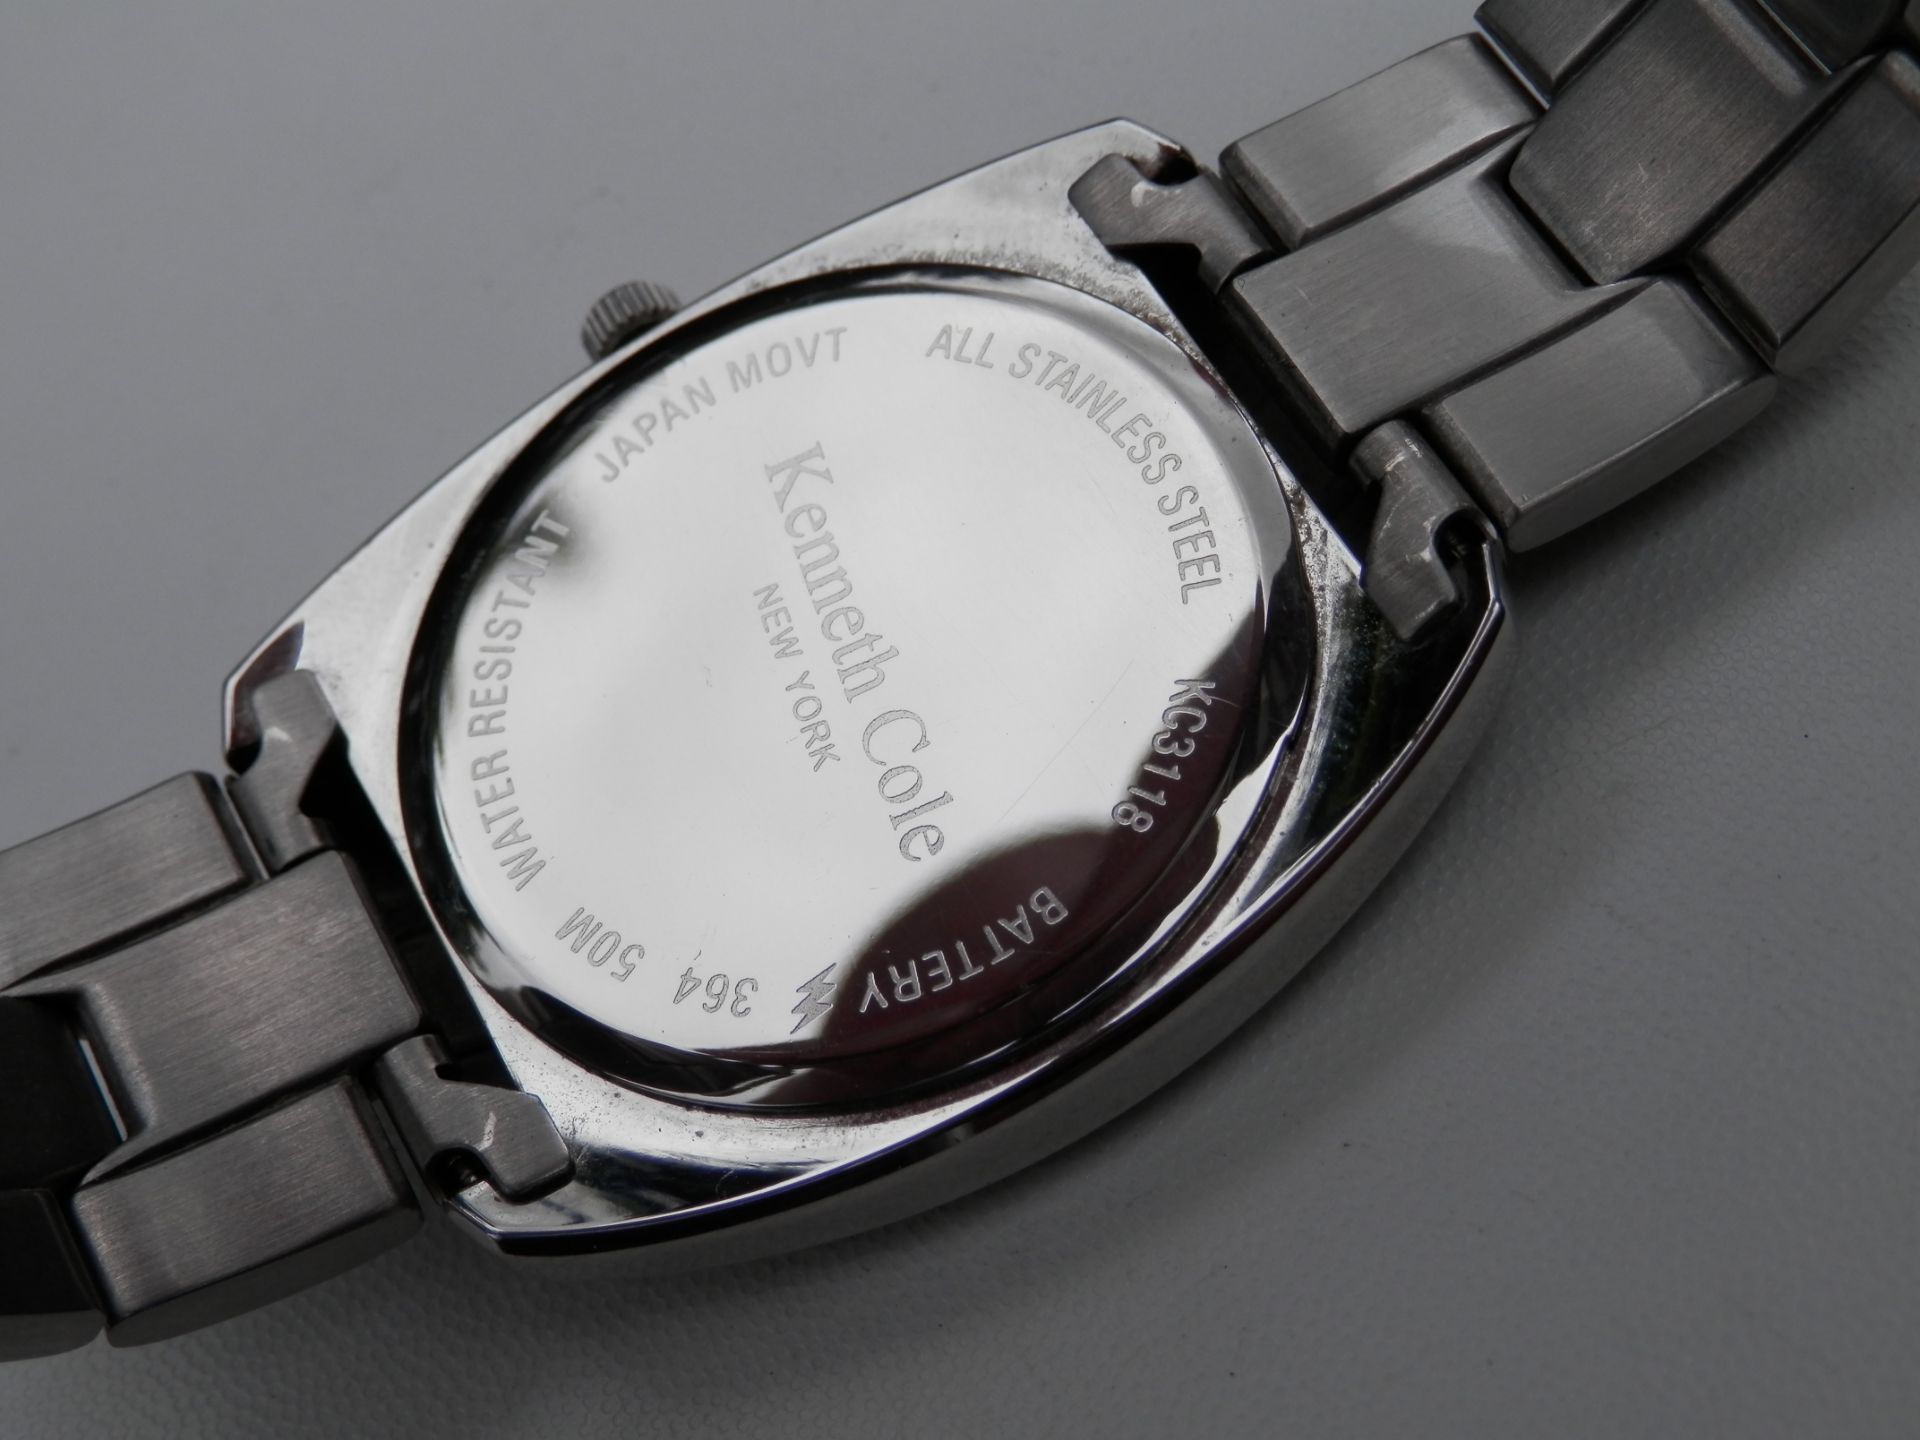 GENTS BOXED KENNETH COLE NEW YORK, FULL STAINLESS 50M WR QUARTZ DATE WATCH, FULLY WORKING. RRP $125 - Image 10 of 11